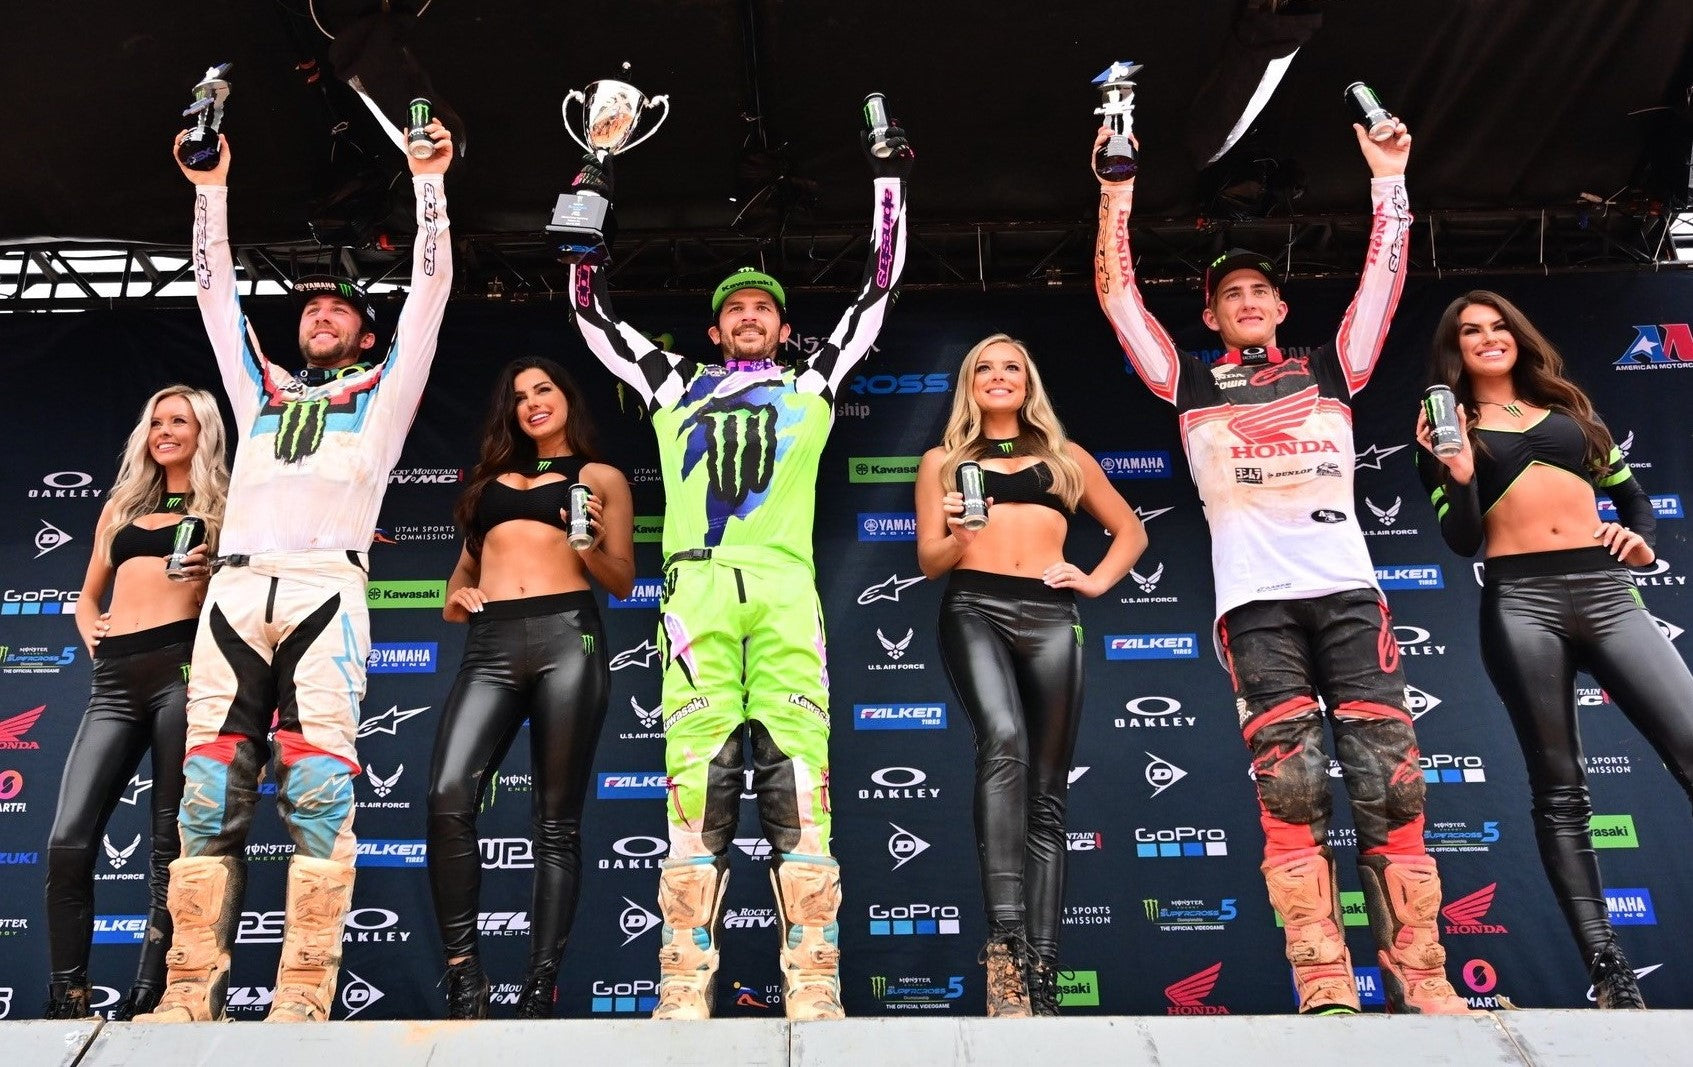 JASON ANDERSON VICTORIOUS IN ATLANTA 450 SUPERCROSS AS ALPINESTARS ATHLETES FILL TOP FOUR POSITIONS